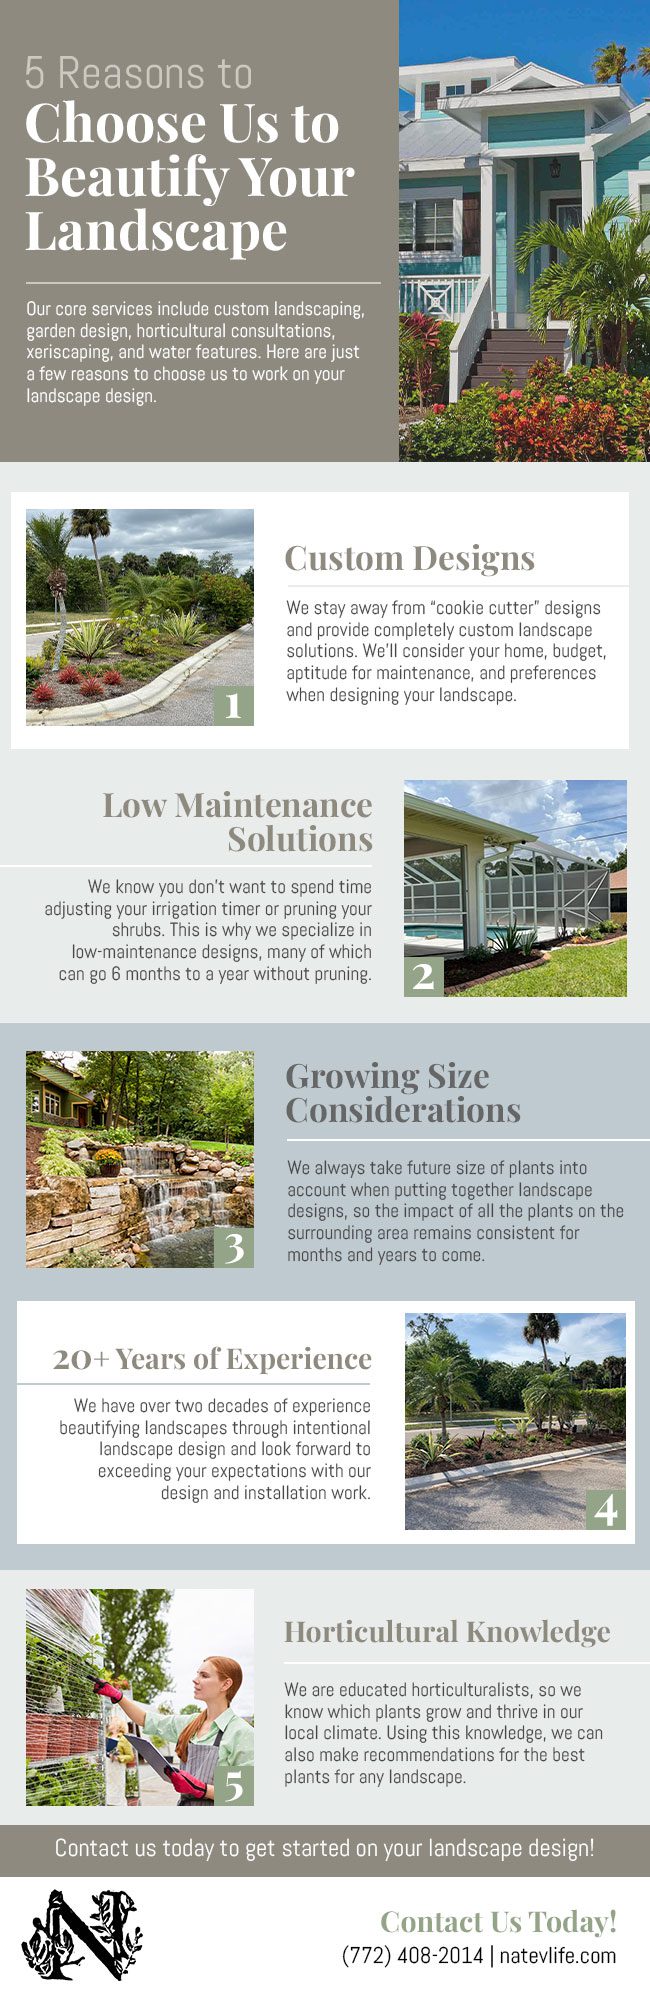 5 Reasons to Choose Us to Beautify Your Landscape